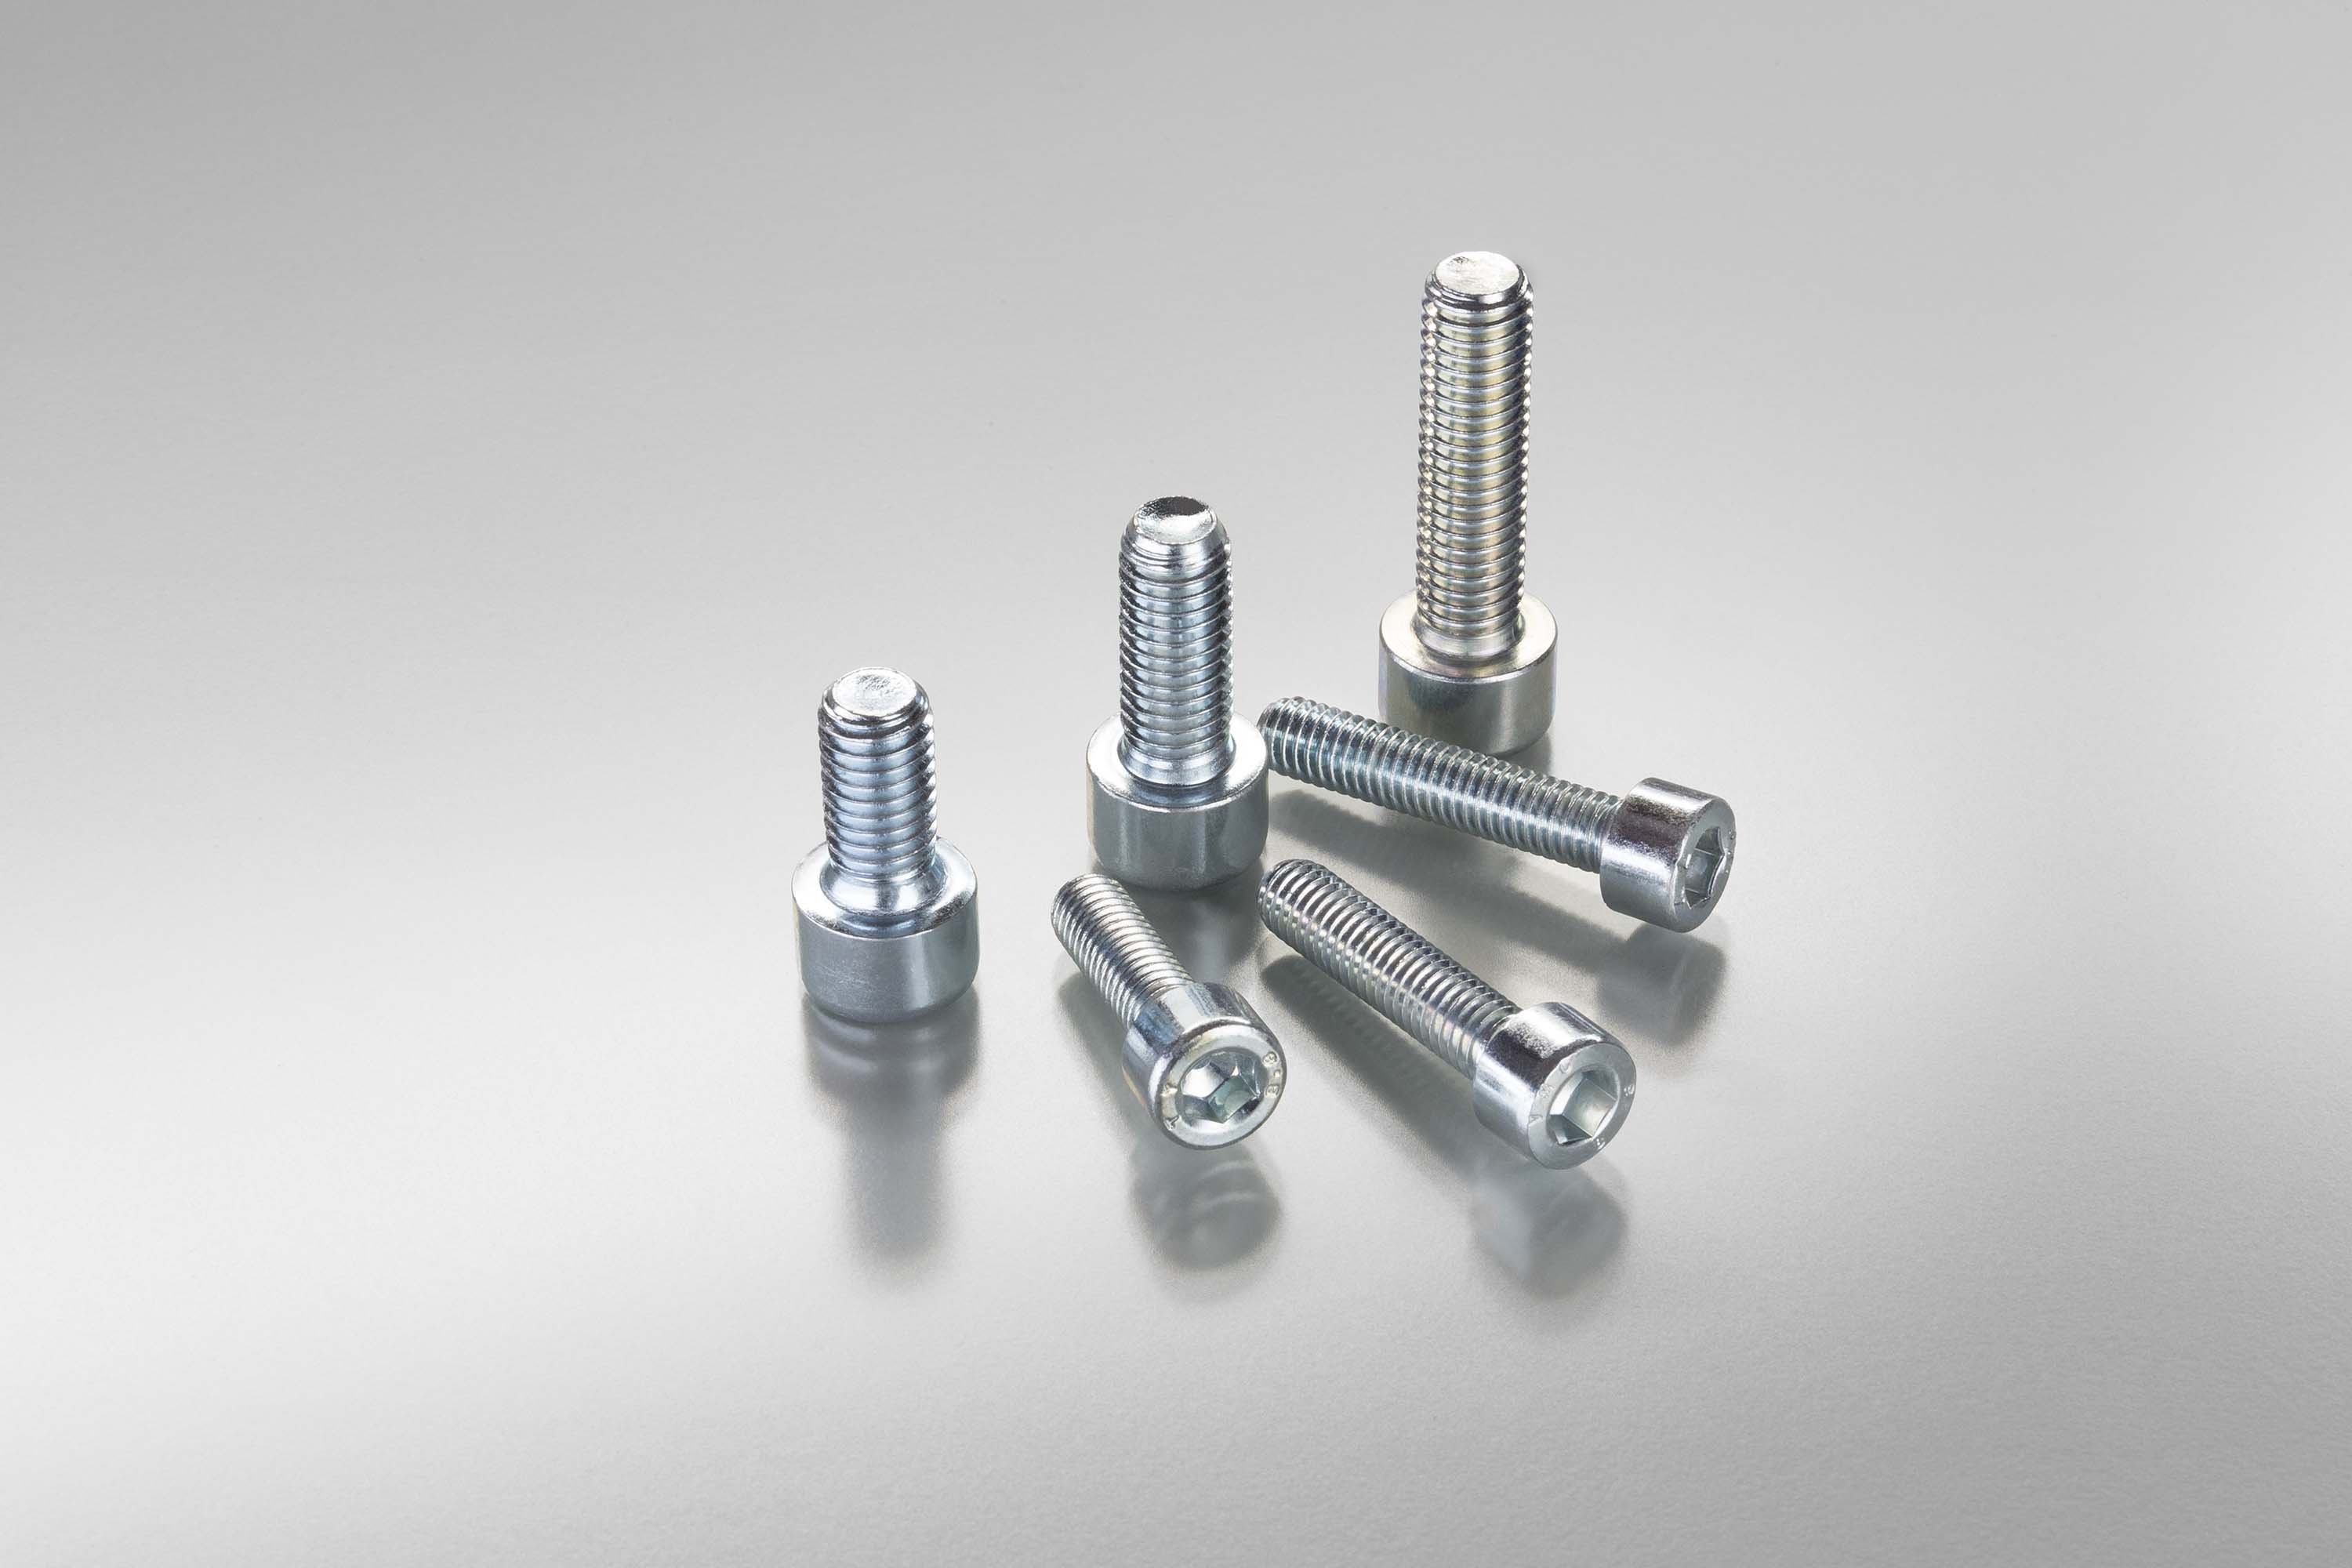 Screws and standard parts